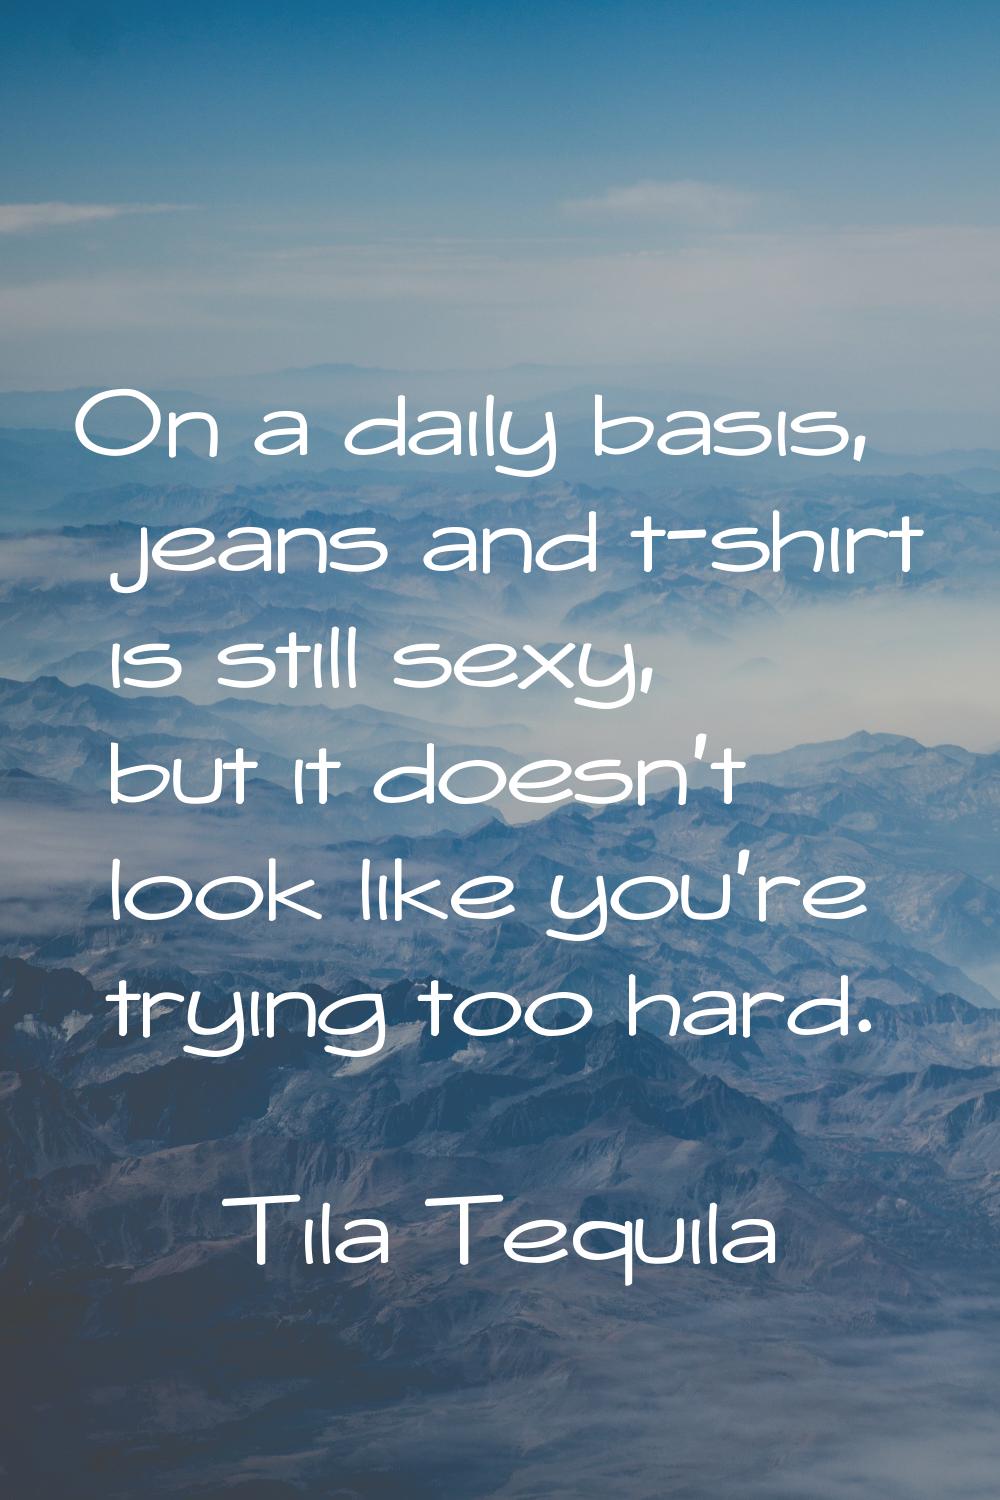 On a daily basis, jeans and t-shirt is still sexy, but it doesn't look like you're trying too hard.